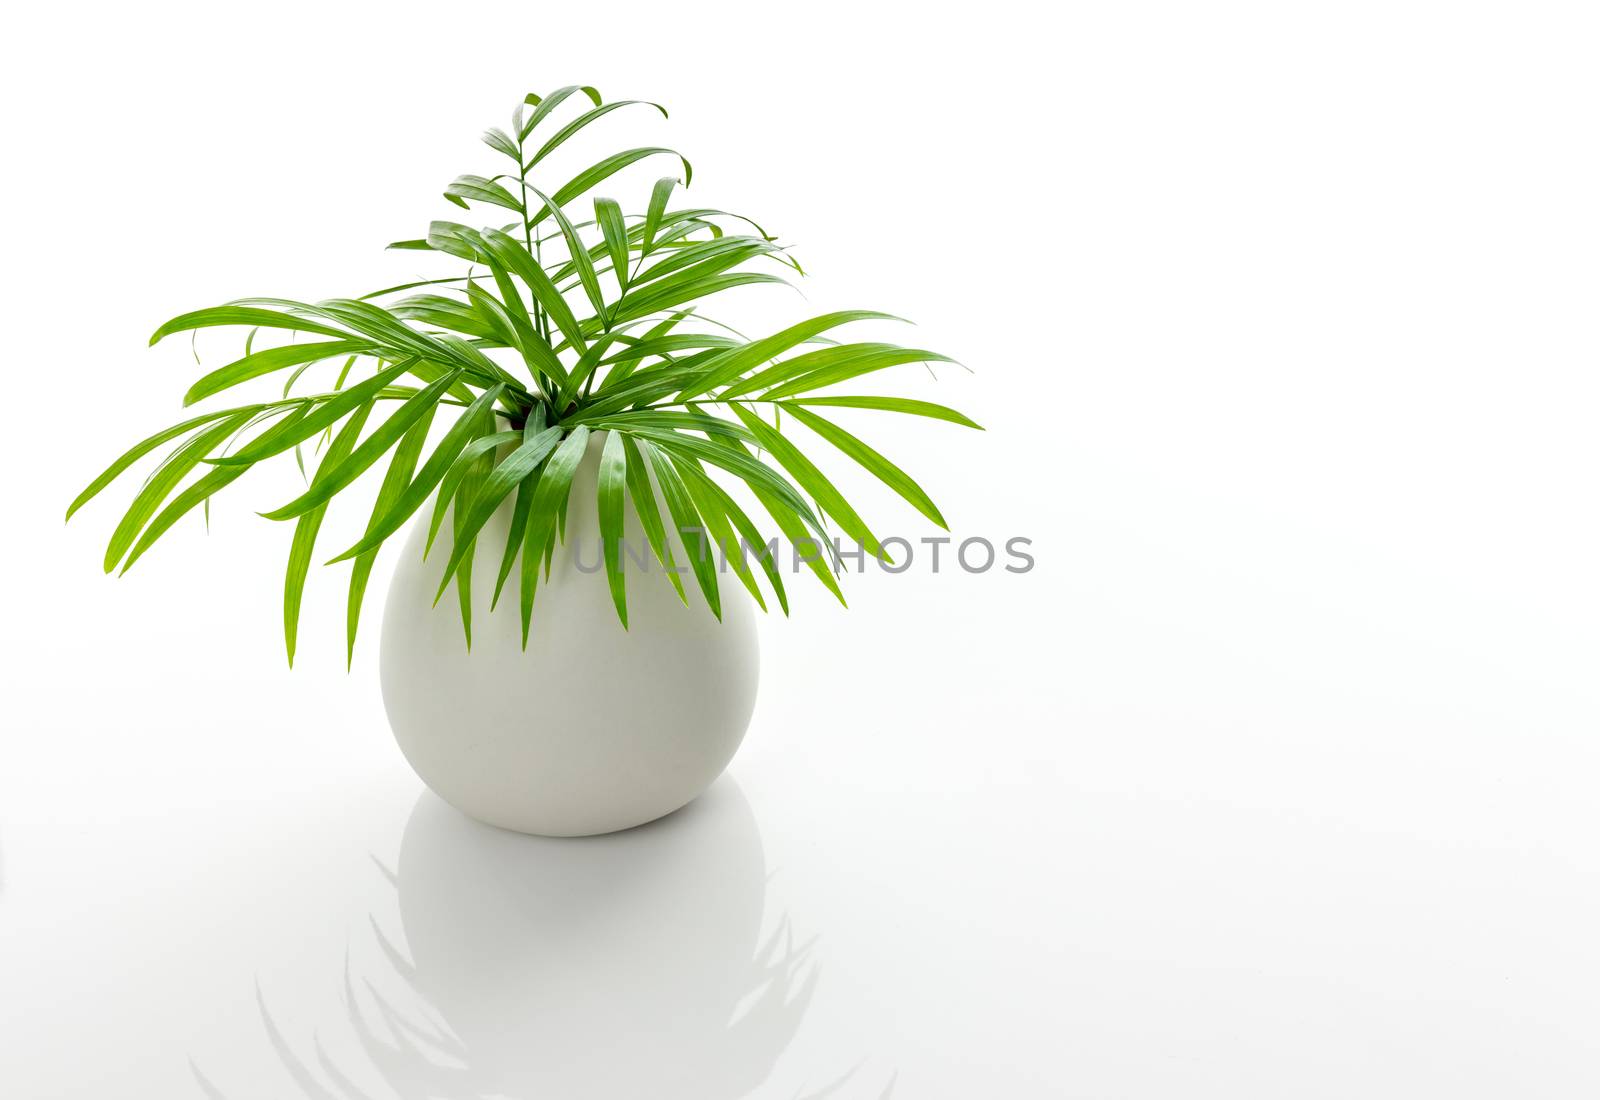 Green palm leaves in a white ceramic vase by anikasalsera